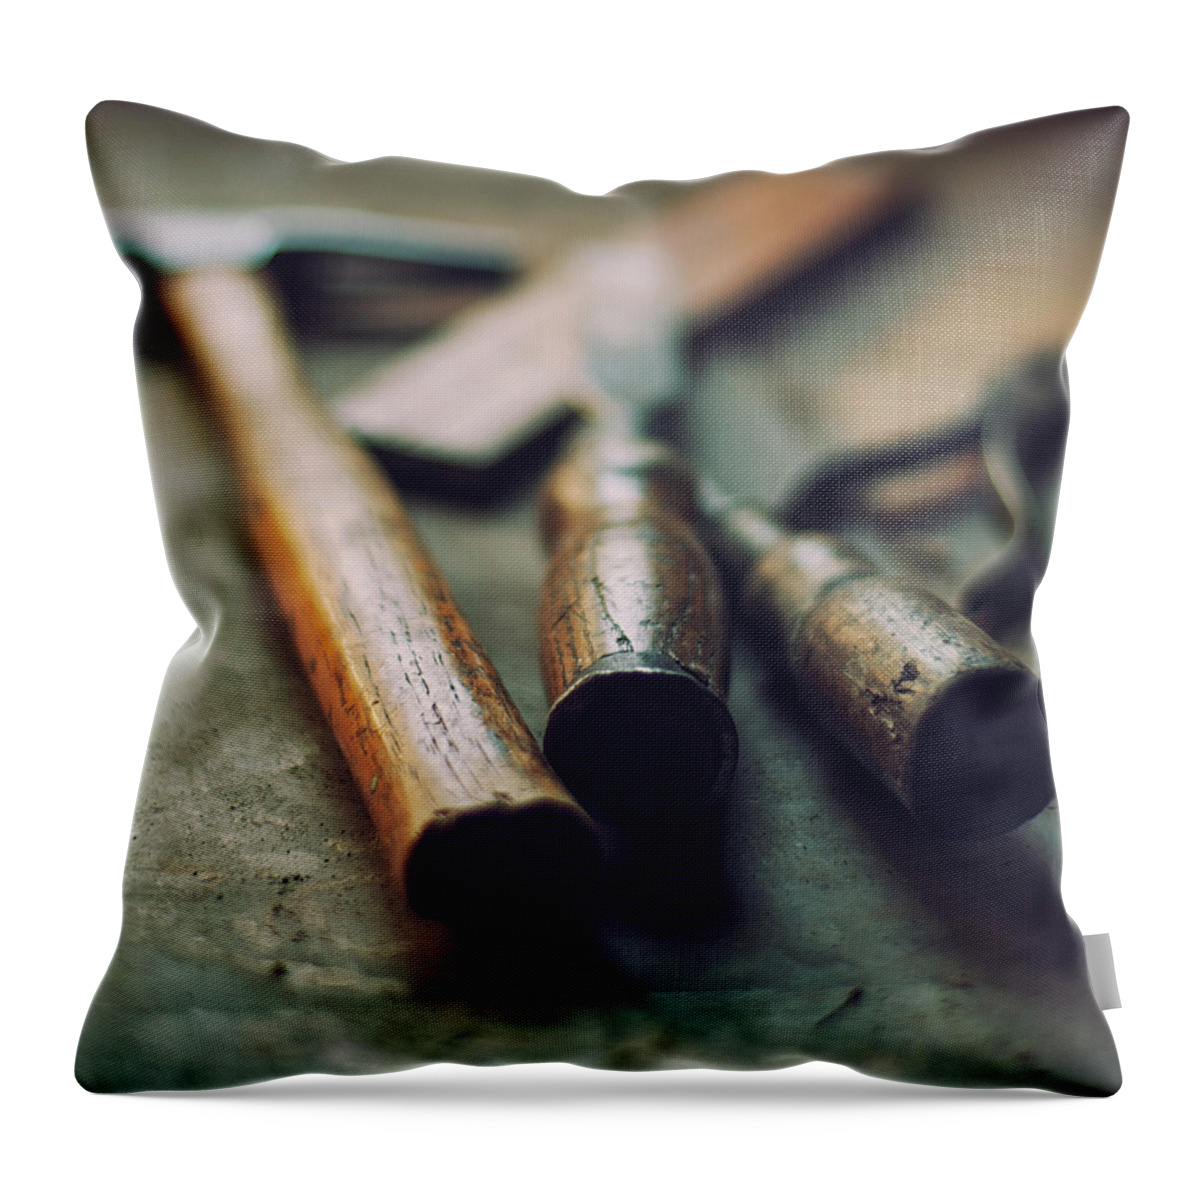 Five Objects Throw Pillow featuring the photograph Tools by Jill Ferry Photography